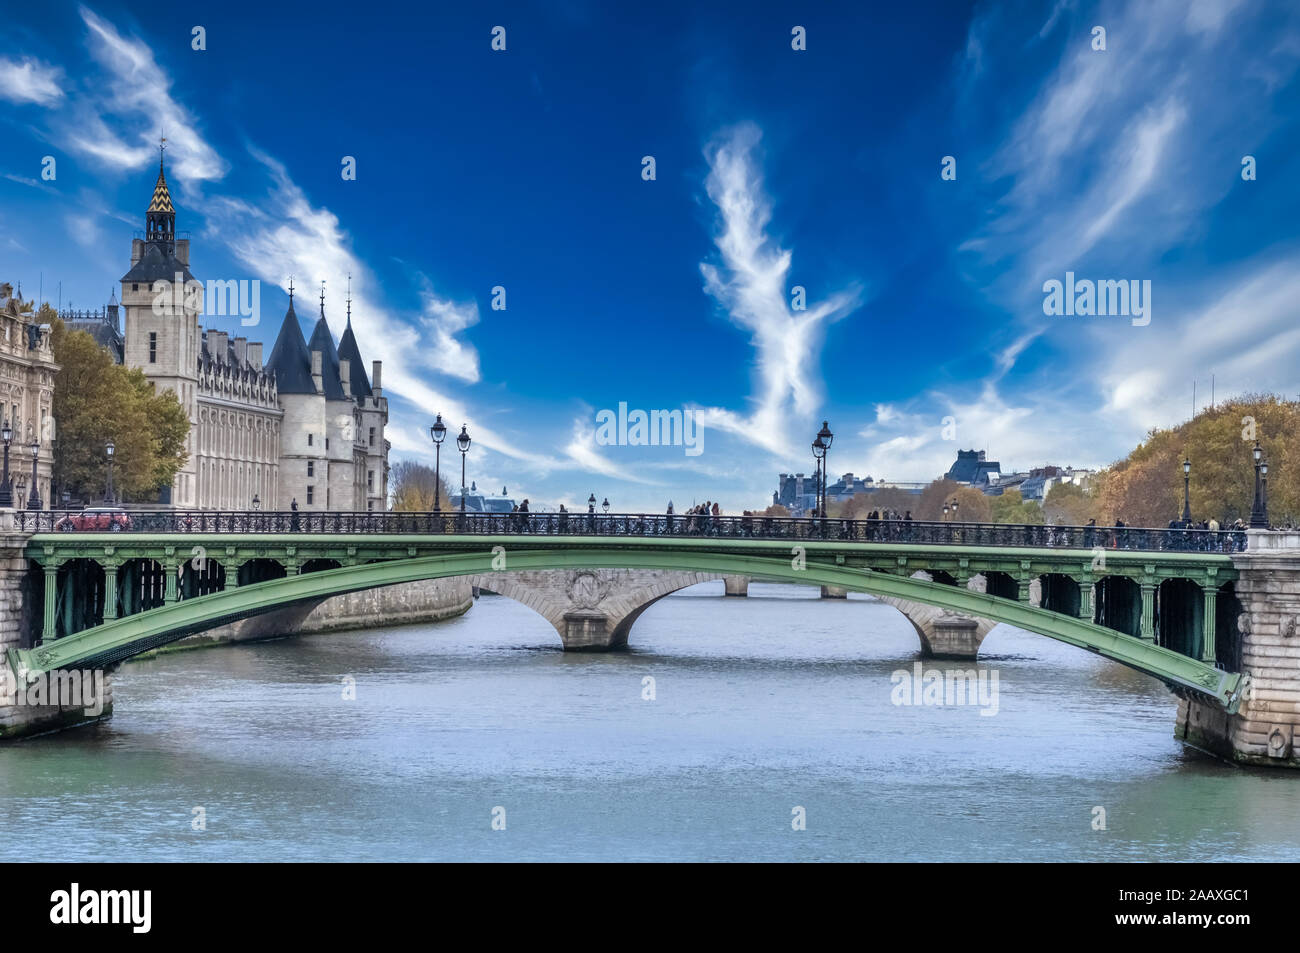 The bridges of the Seine River with the Conciergerie in the background, Paris, France Stock Photo